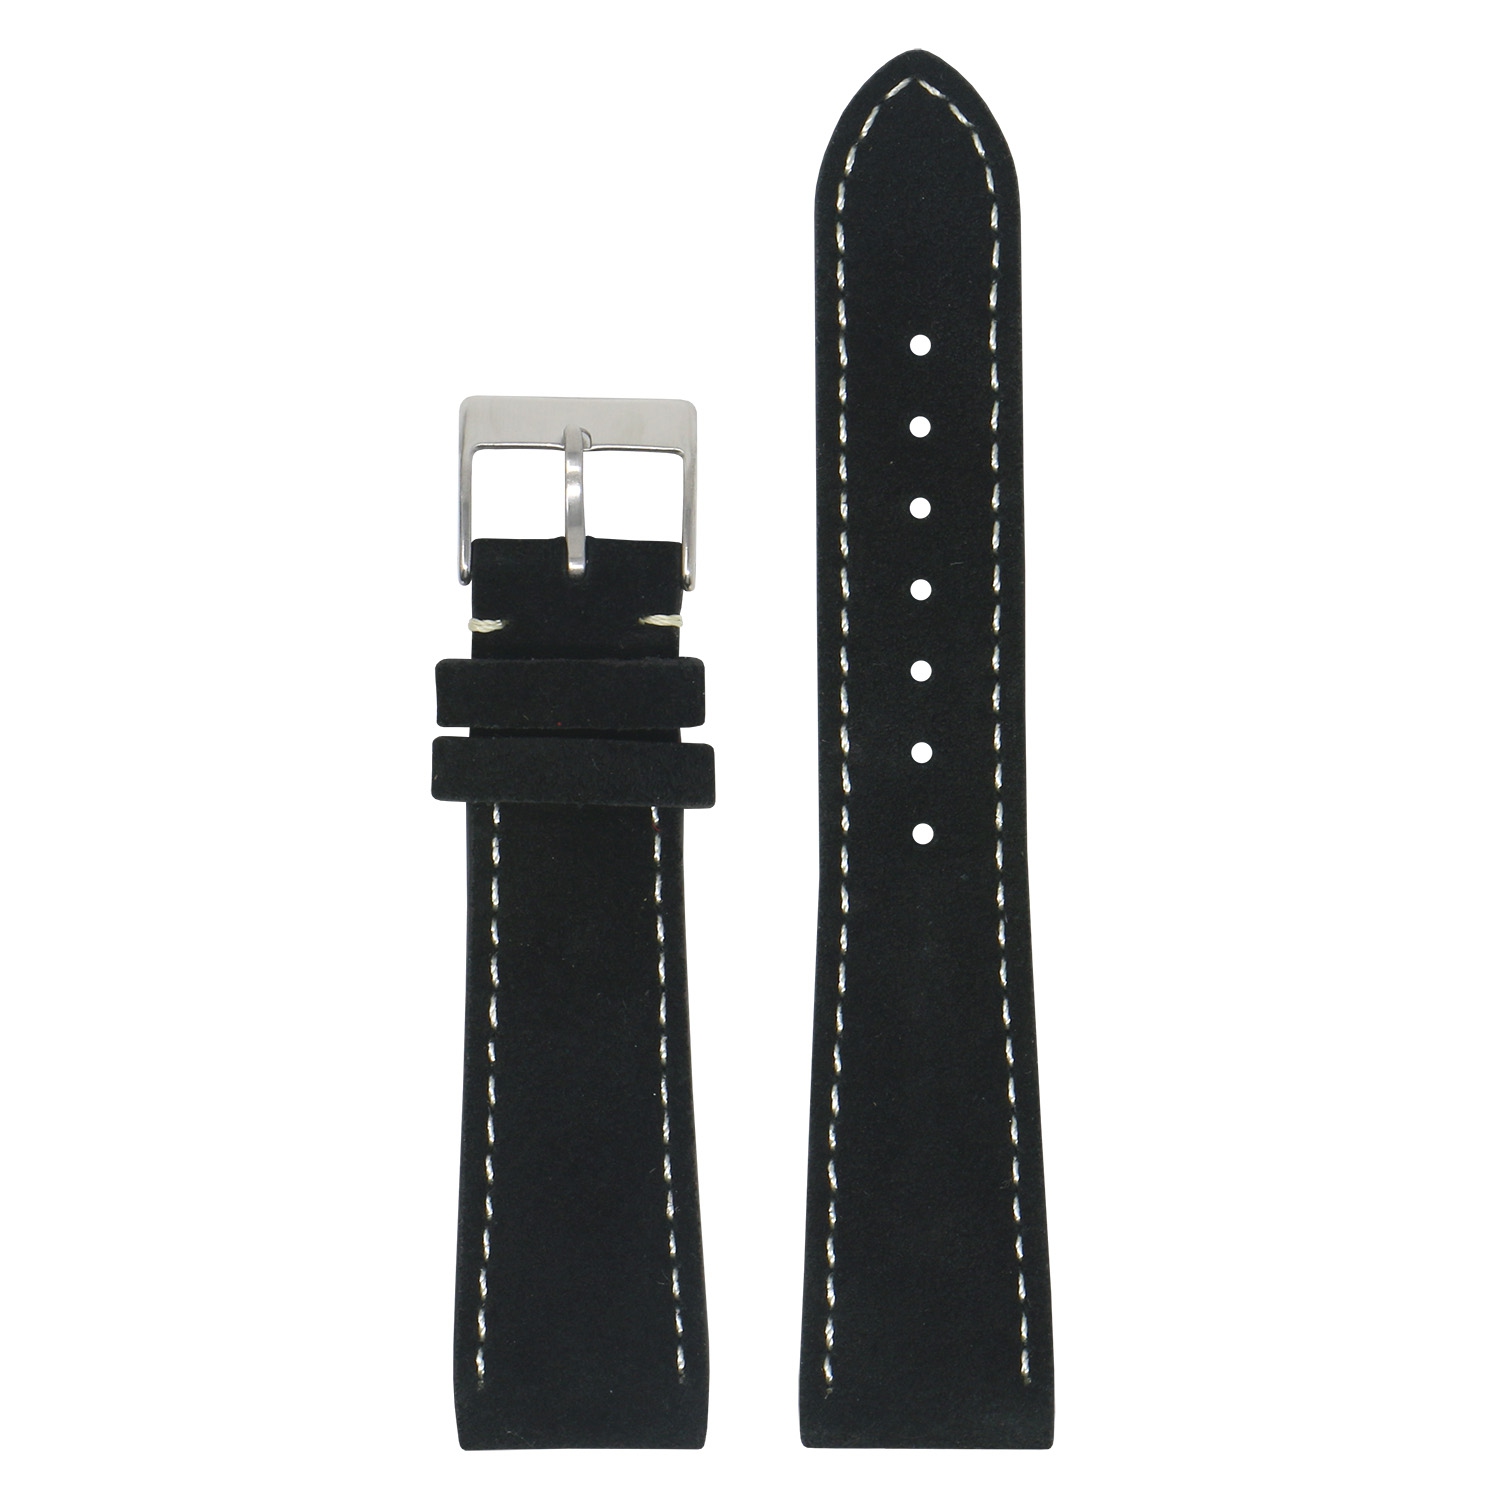 StrapsCo Classic Suede (Short, Standard, Long) Watch Band Strap for Samsung Galaxy Watch 3 - Short Length - 20mm - For 41mm Galaxy Watch3 - Black